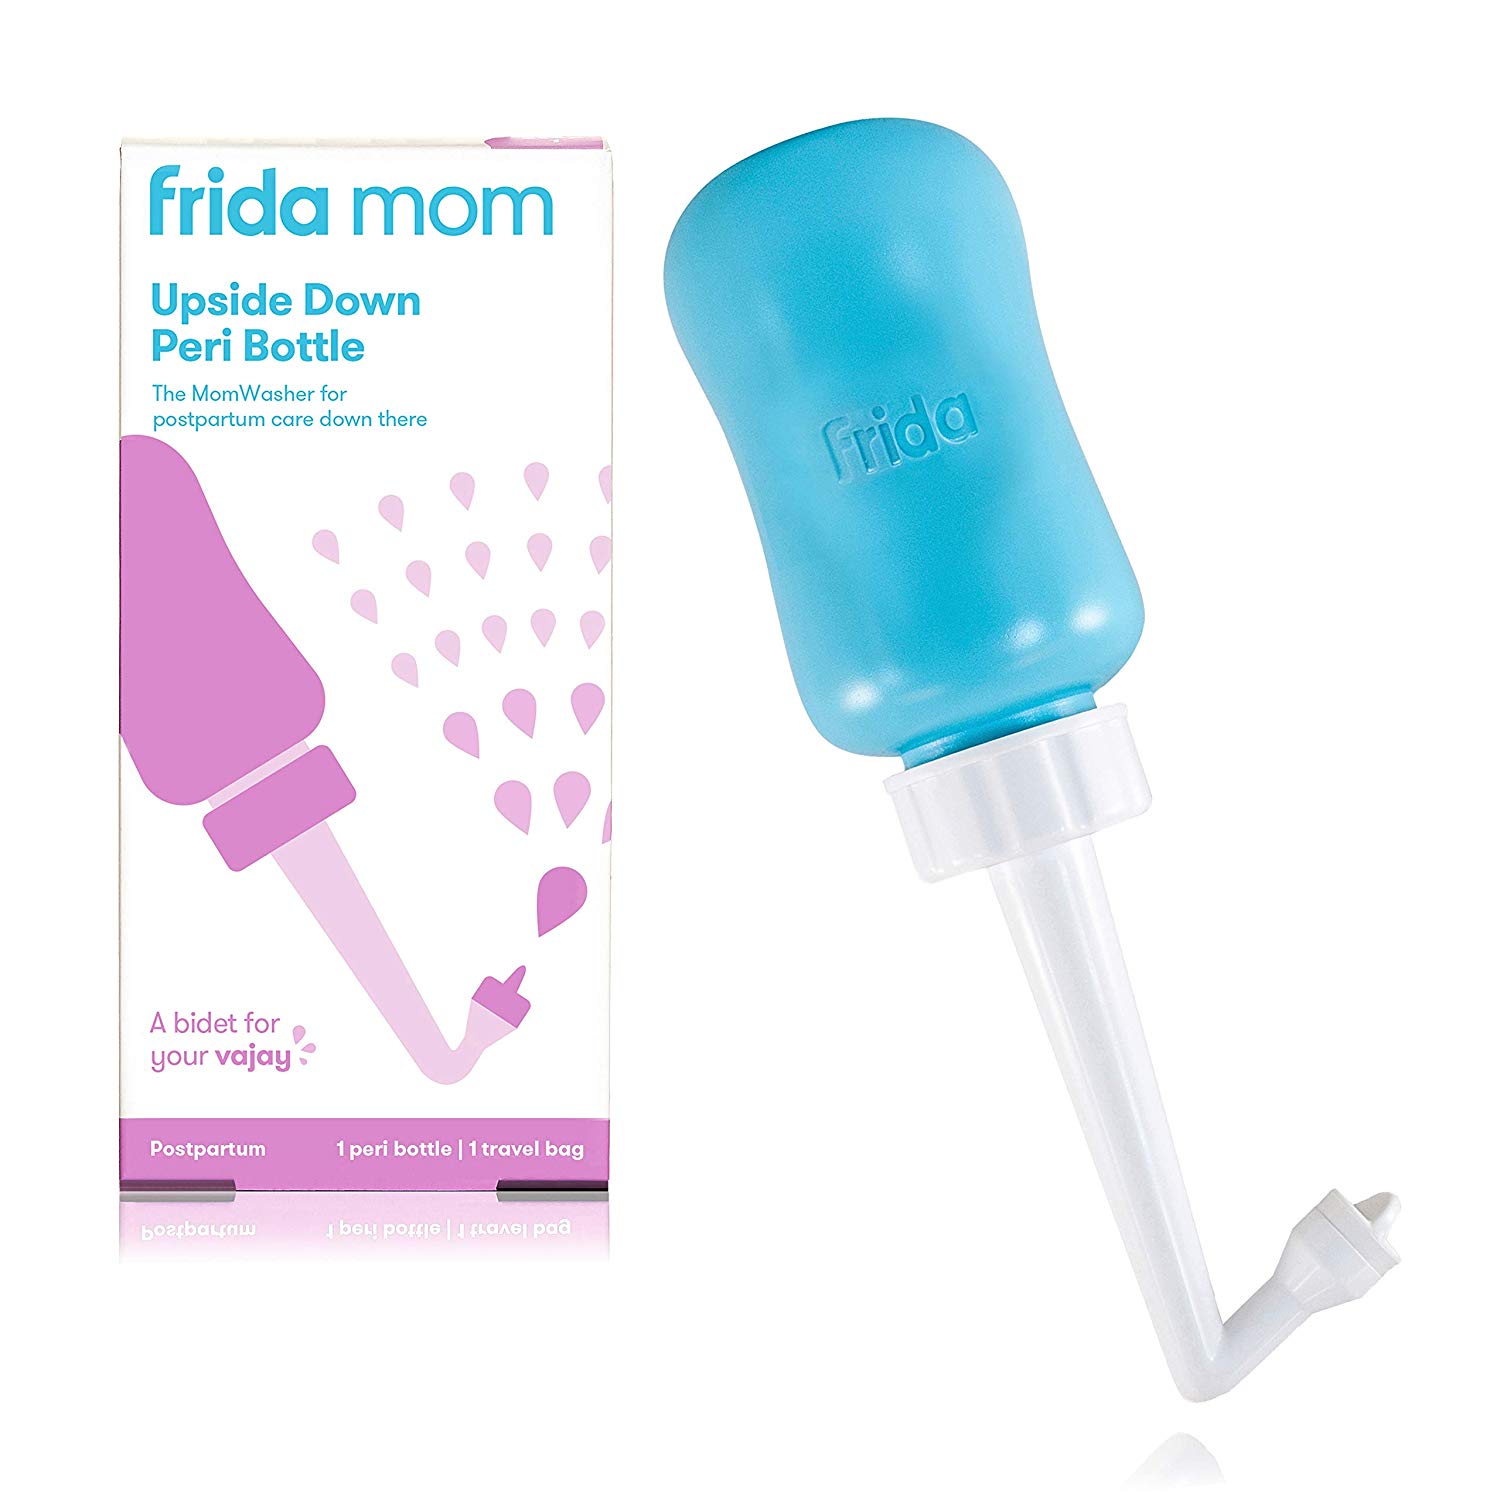 Frida mom C-section recovery kit Comes with bathroom essential bag, g